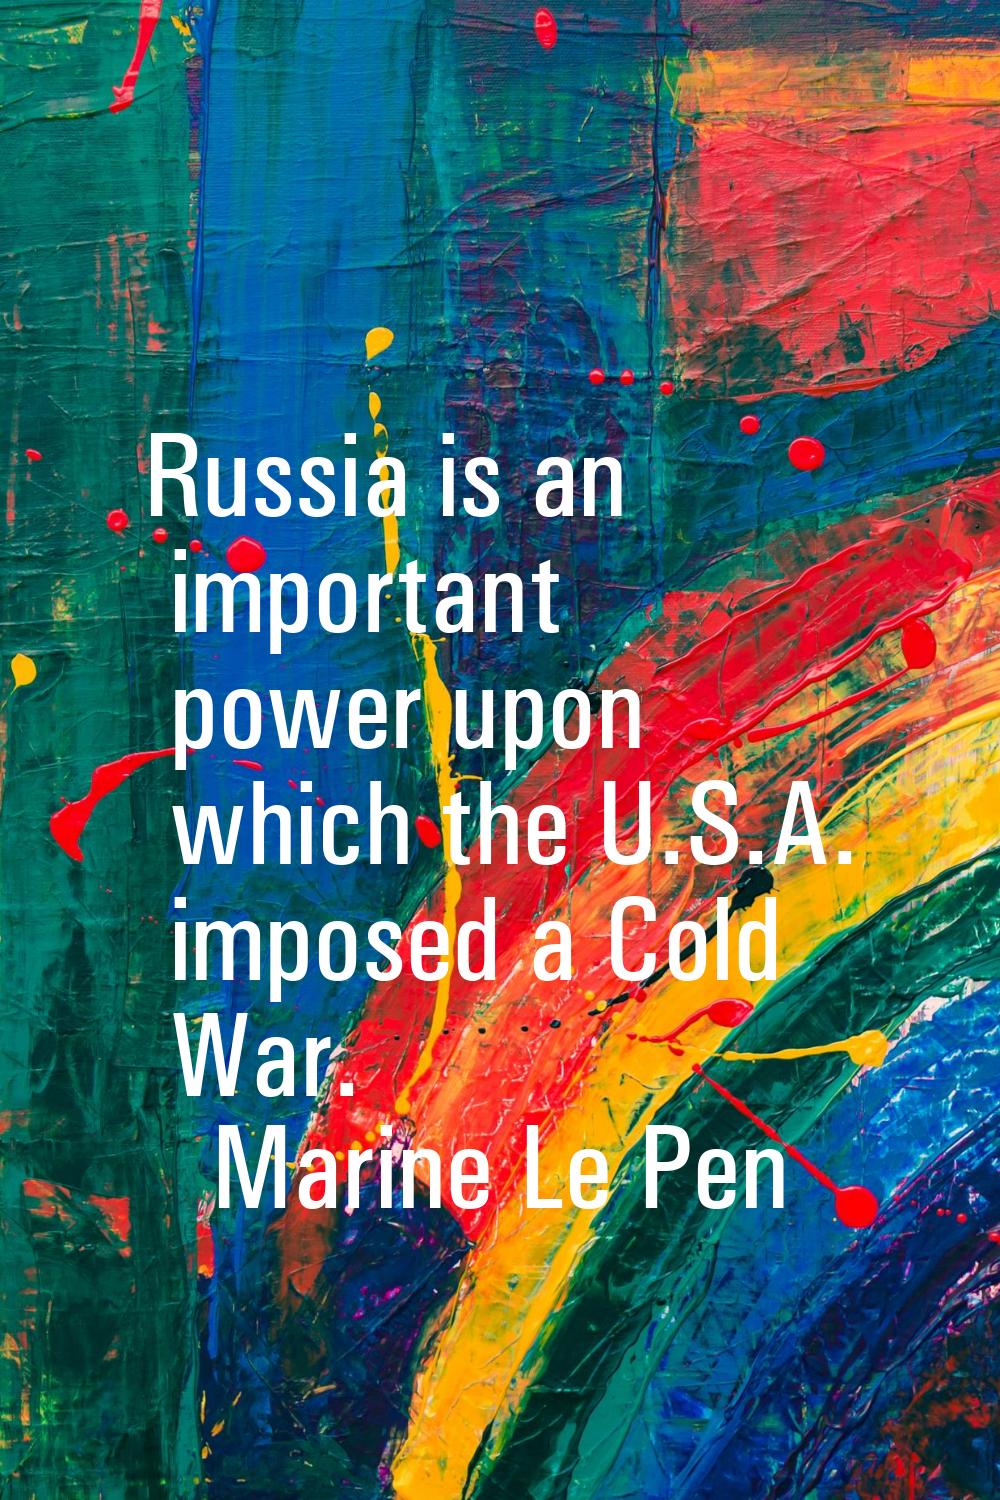 Russia is an important power upon which the U.S.A. imposed a Cold War.